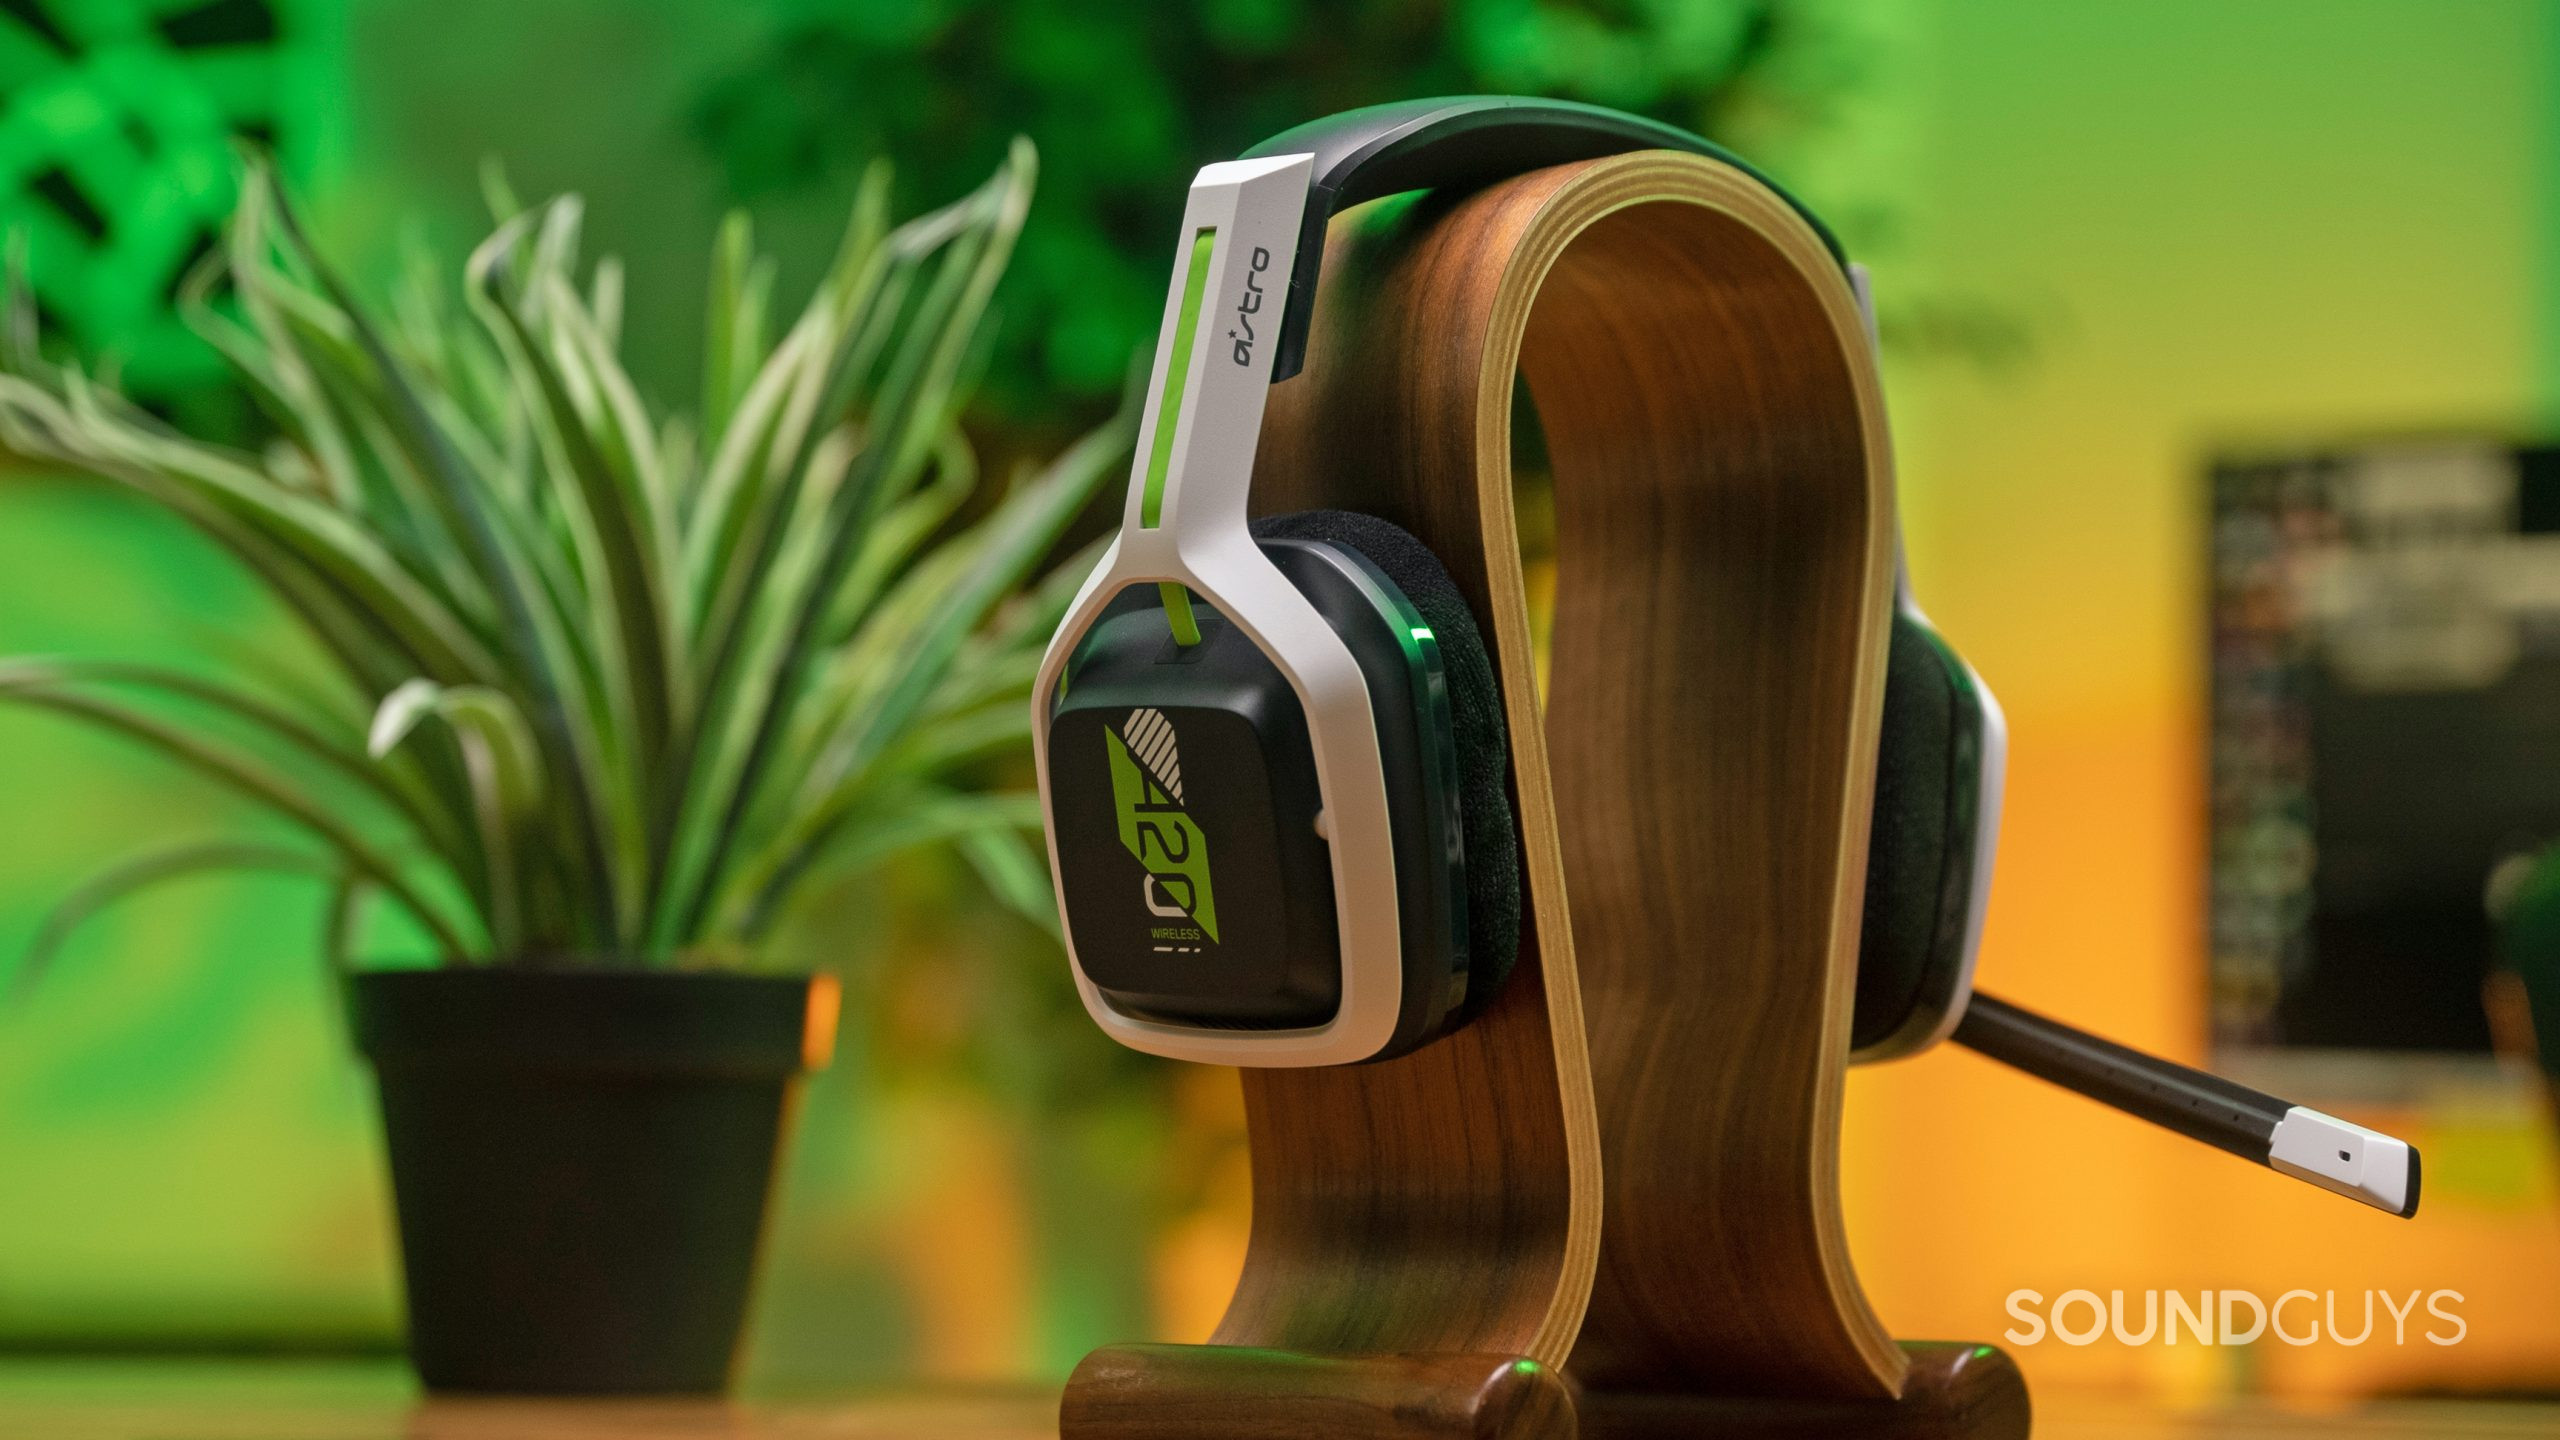 Astro A20 Gaming Headset Gen 2 review